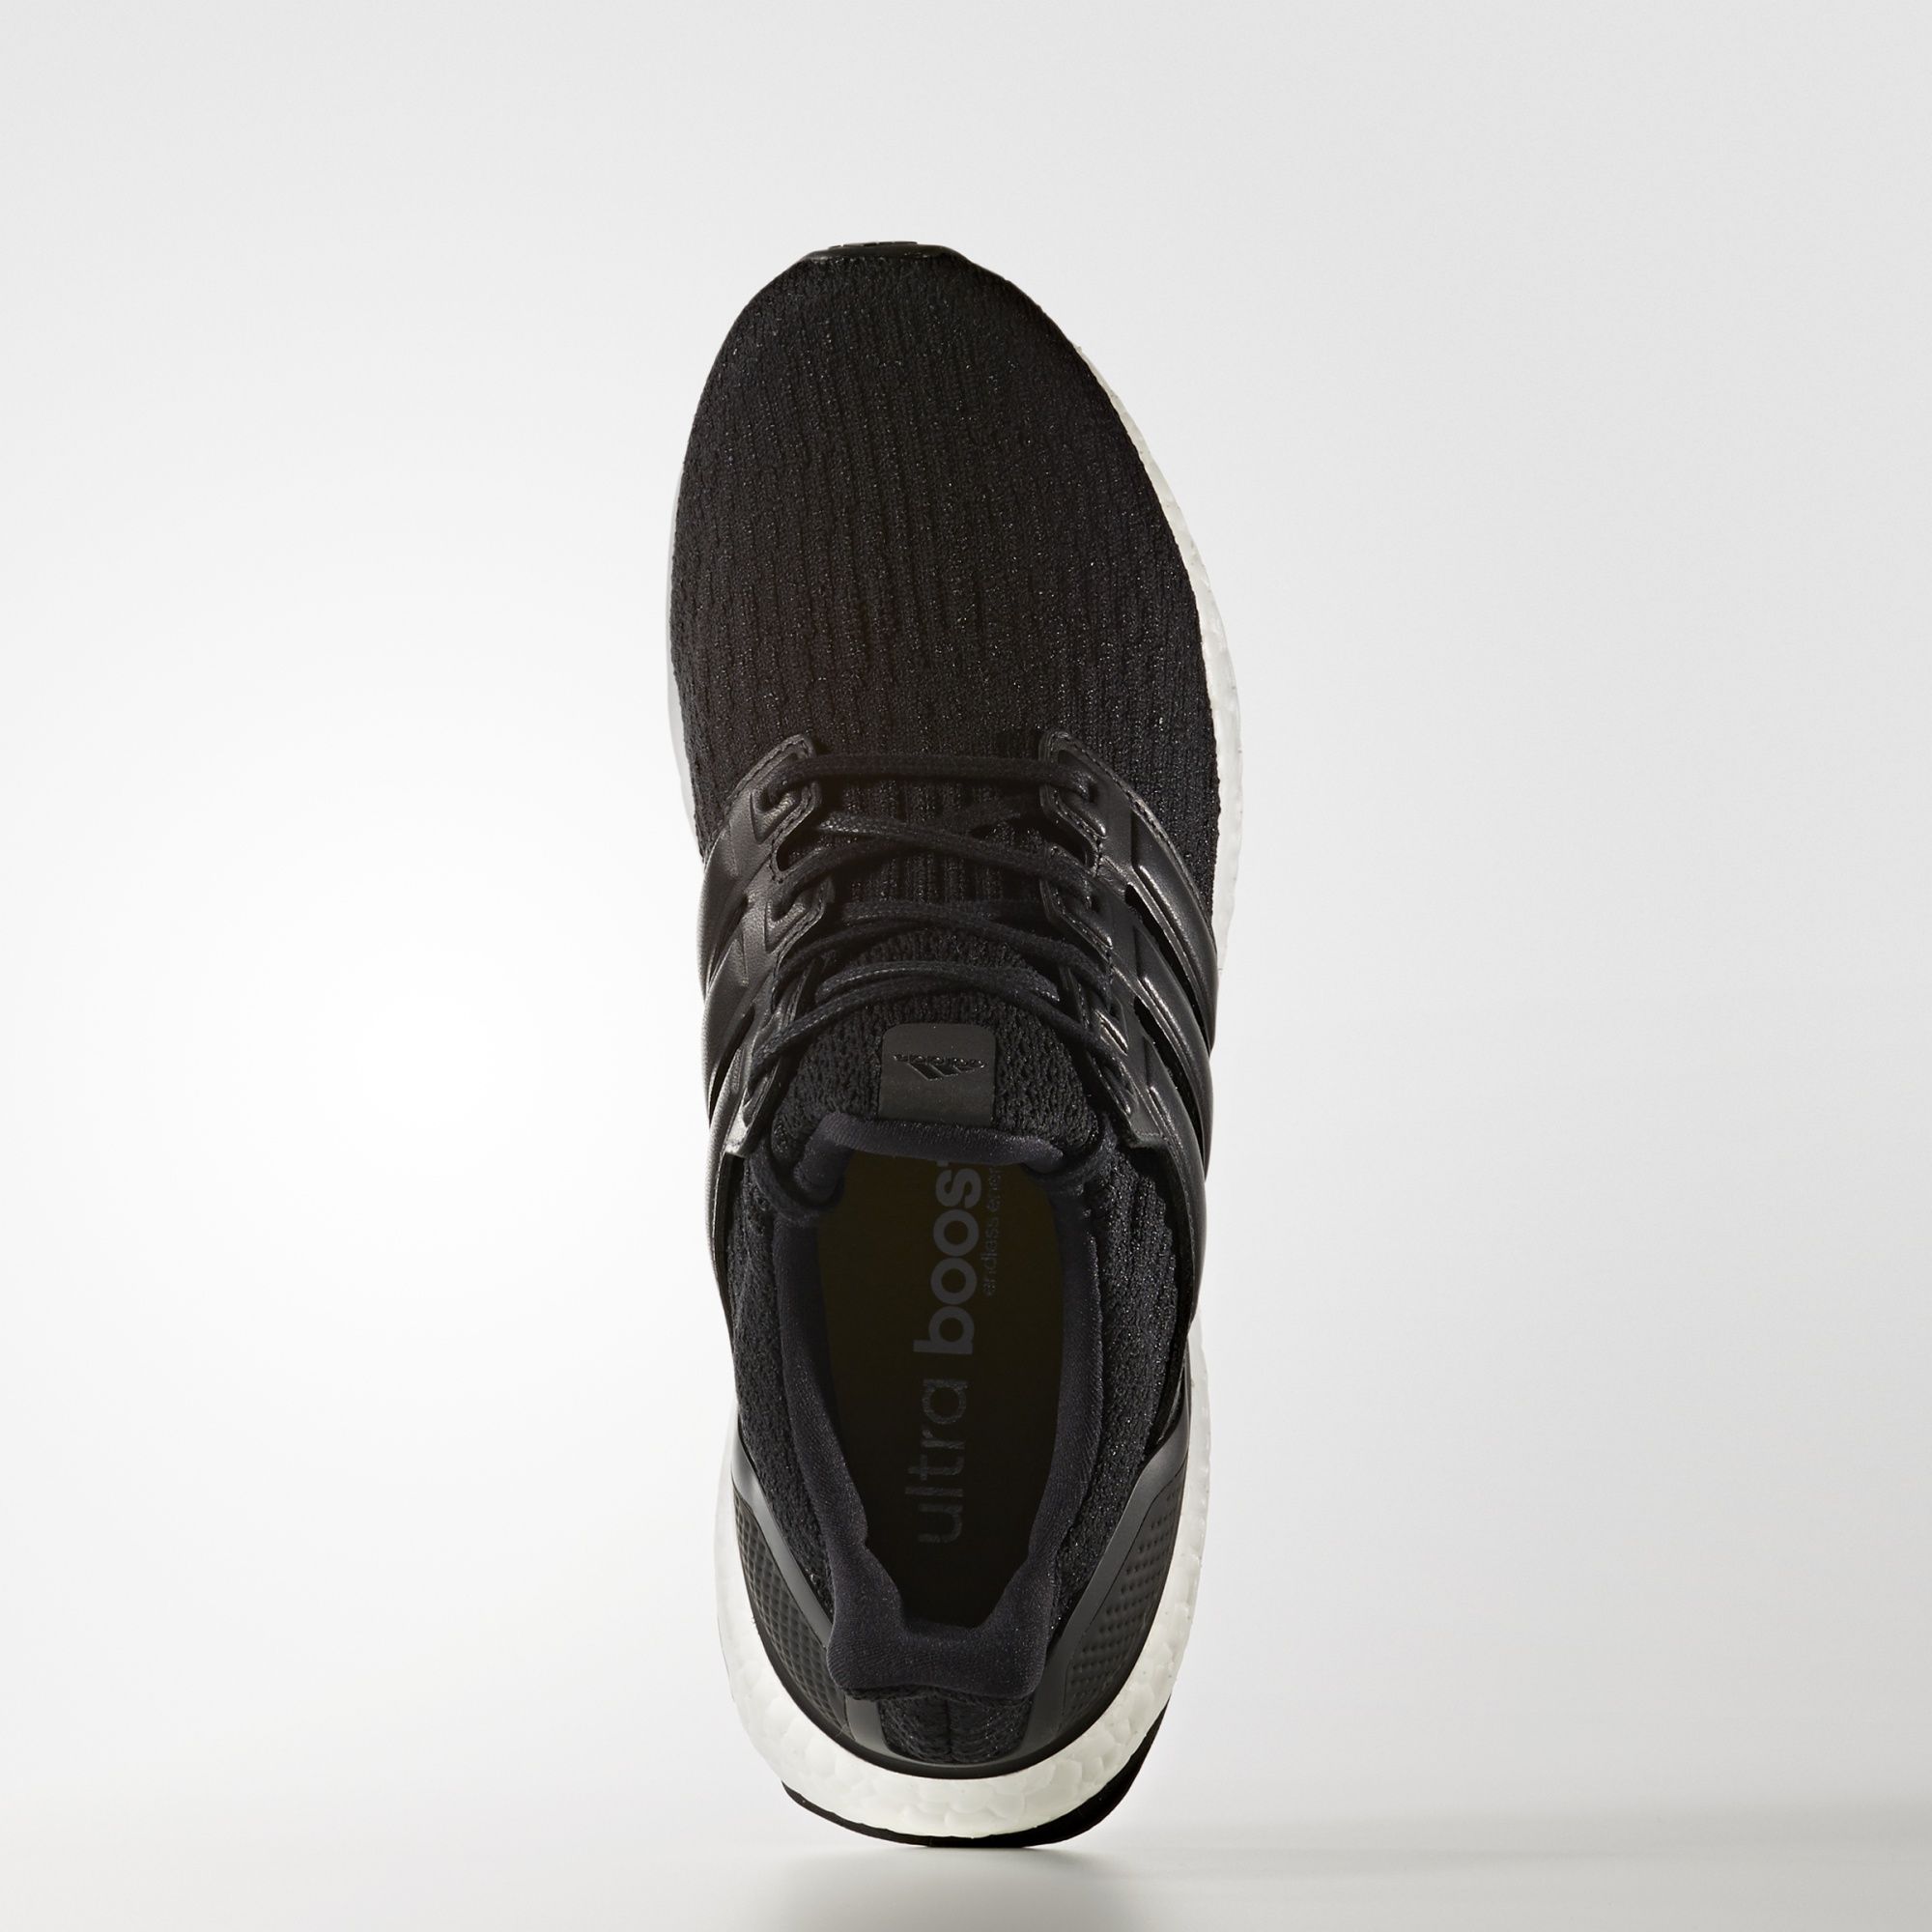 adidas-ultra-boost-3-limited-edition-core-black-4